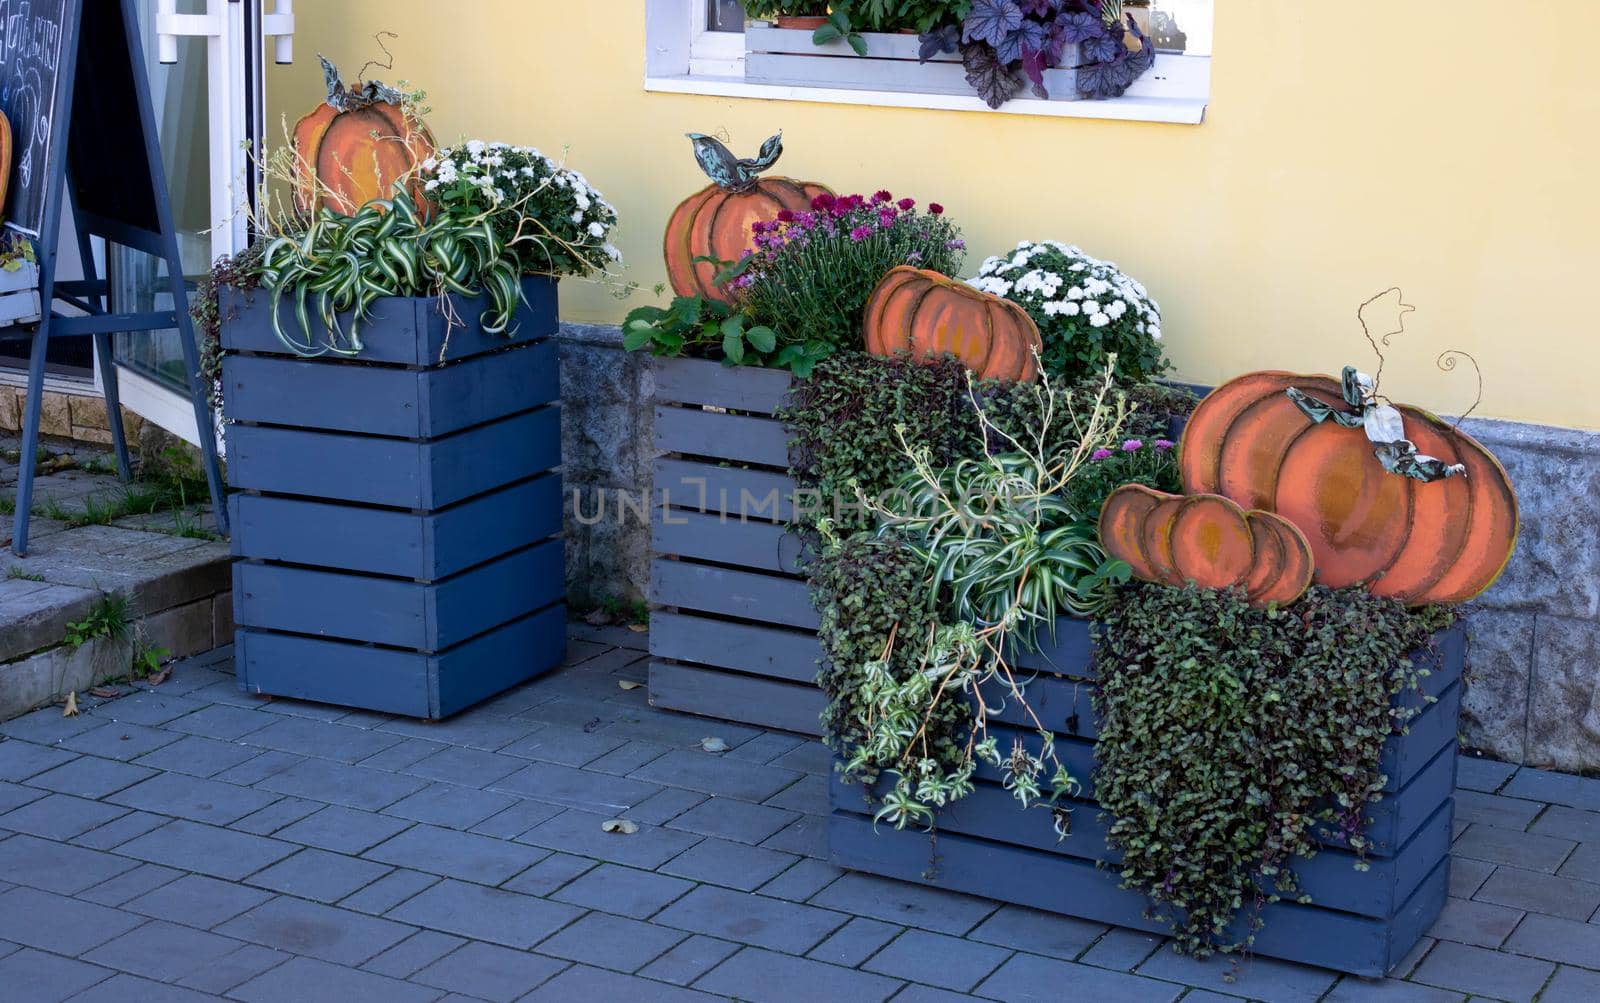 Decoration in the yard for Halloween.Orange wooden pumpkins, flowers in gray wooden boxes by lapushka62